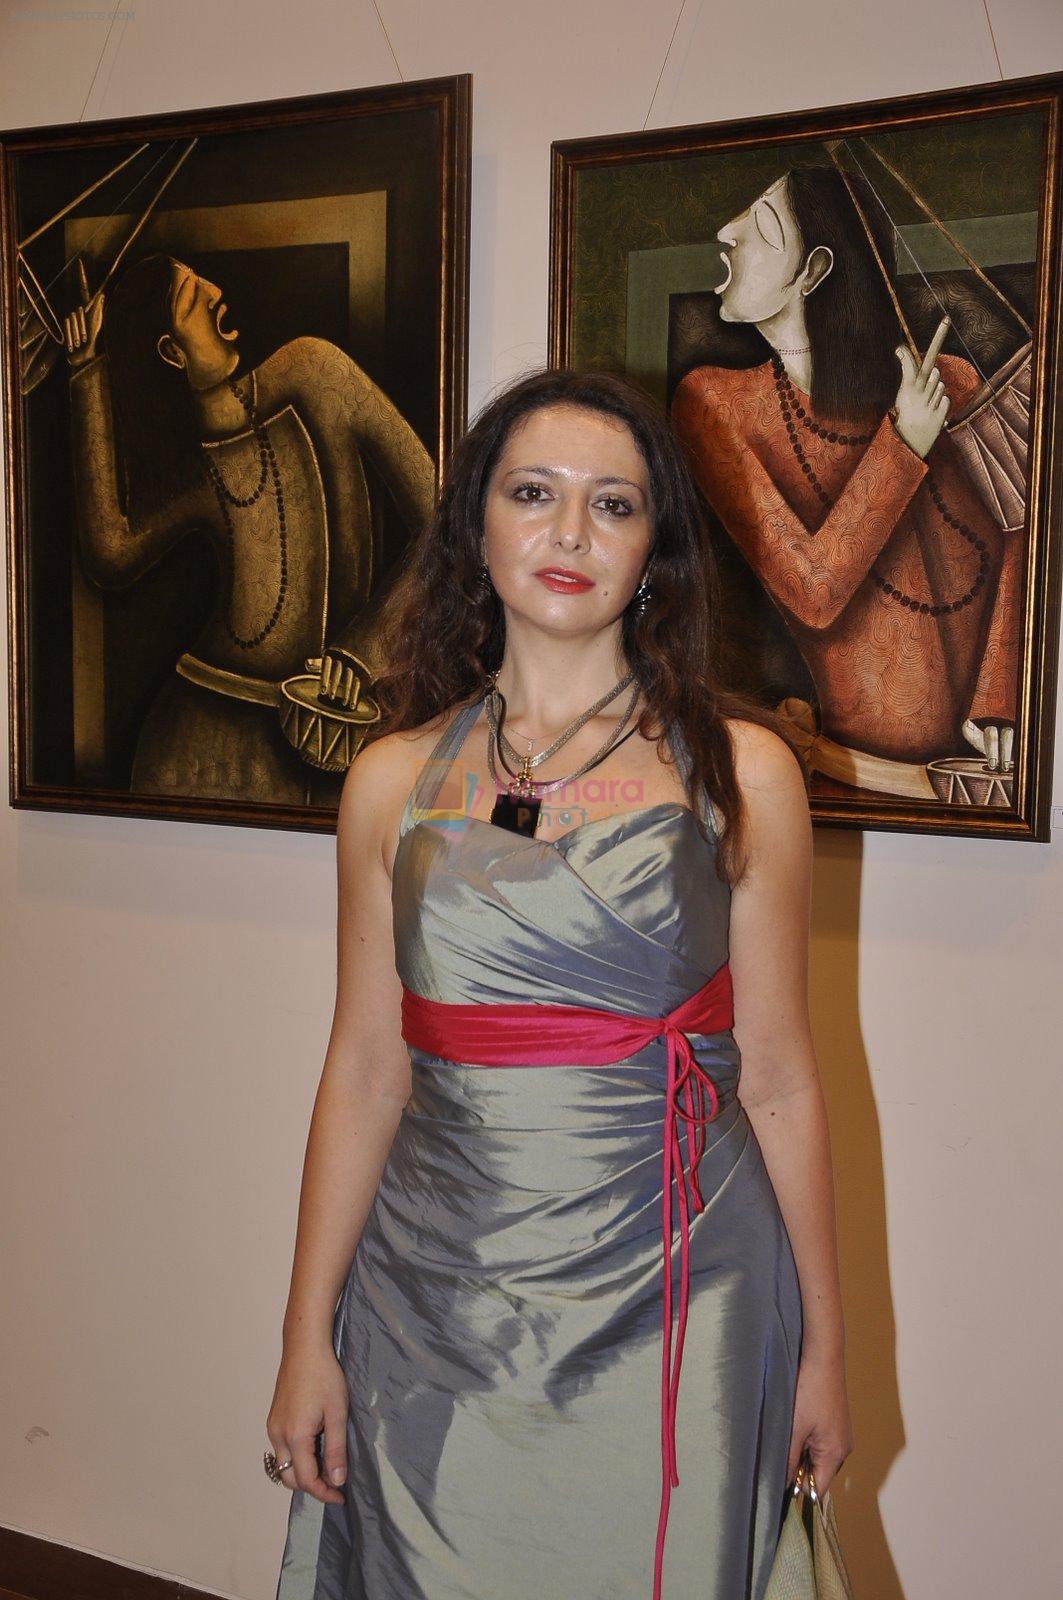 graces group art show in nehru on 4th Nov 2014